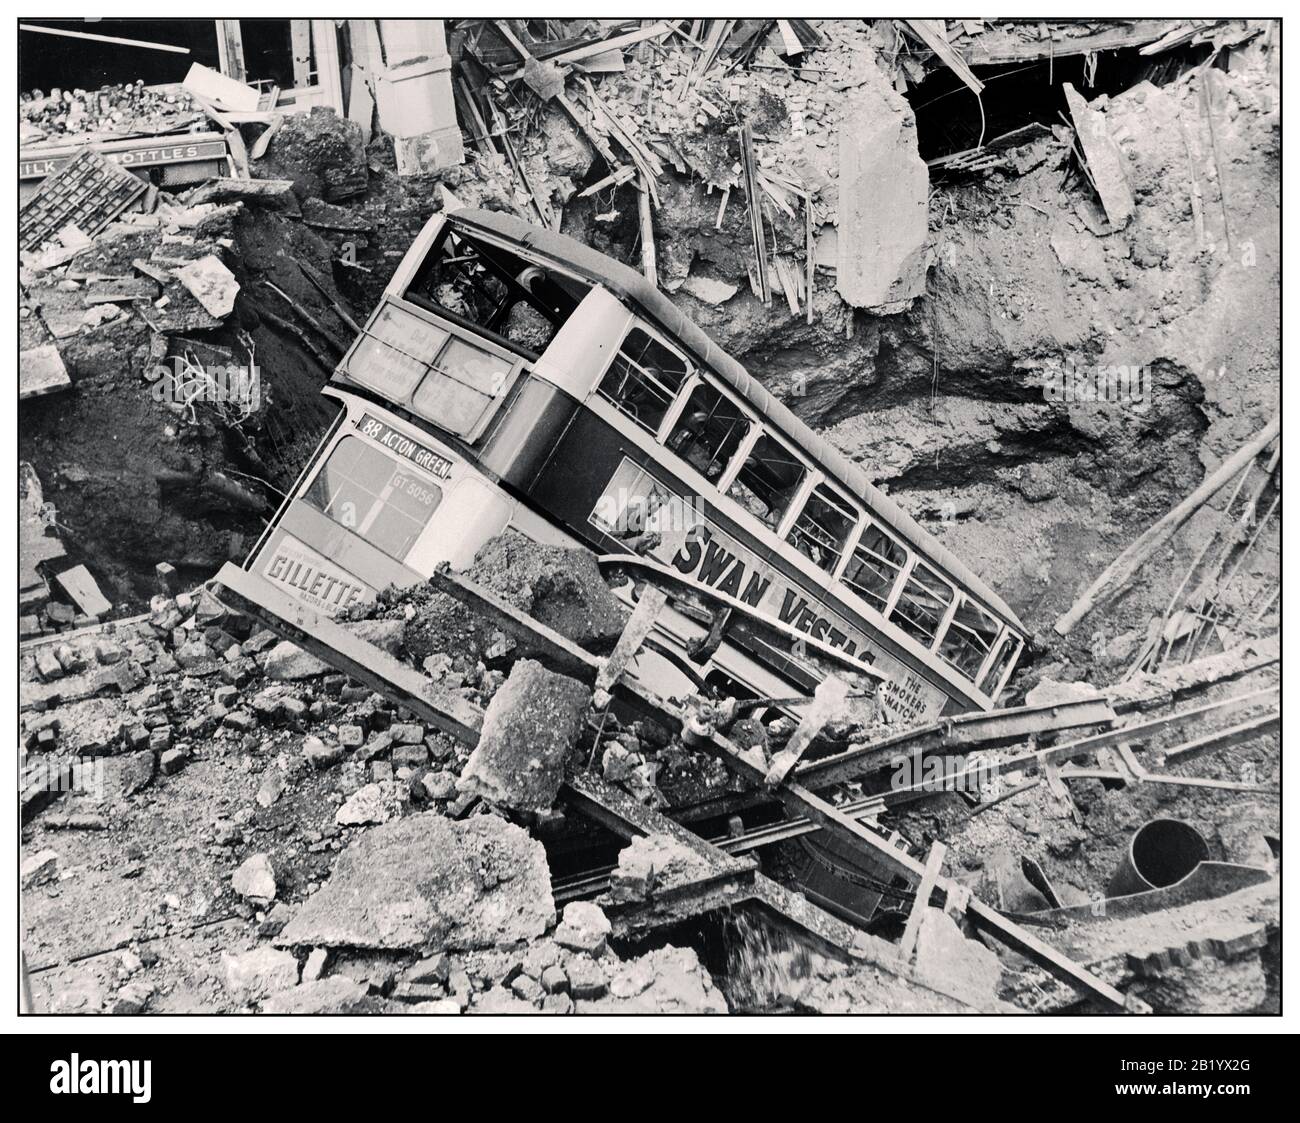 THE LONDON BLITZ BUS BOMB CRATER WW2 1940’s Nazi Air Raid Bomb Damage in Britain during the Second World War In the aftermath of a bombing raid, a London bus lies in a bomb crater in Balham, South London. World War II Stock Photo